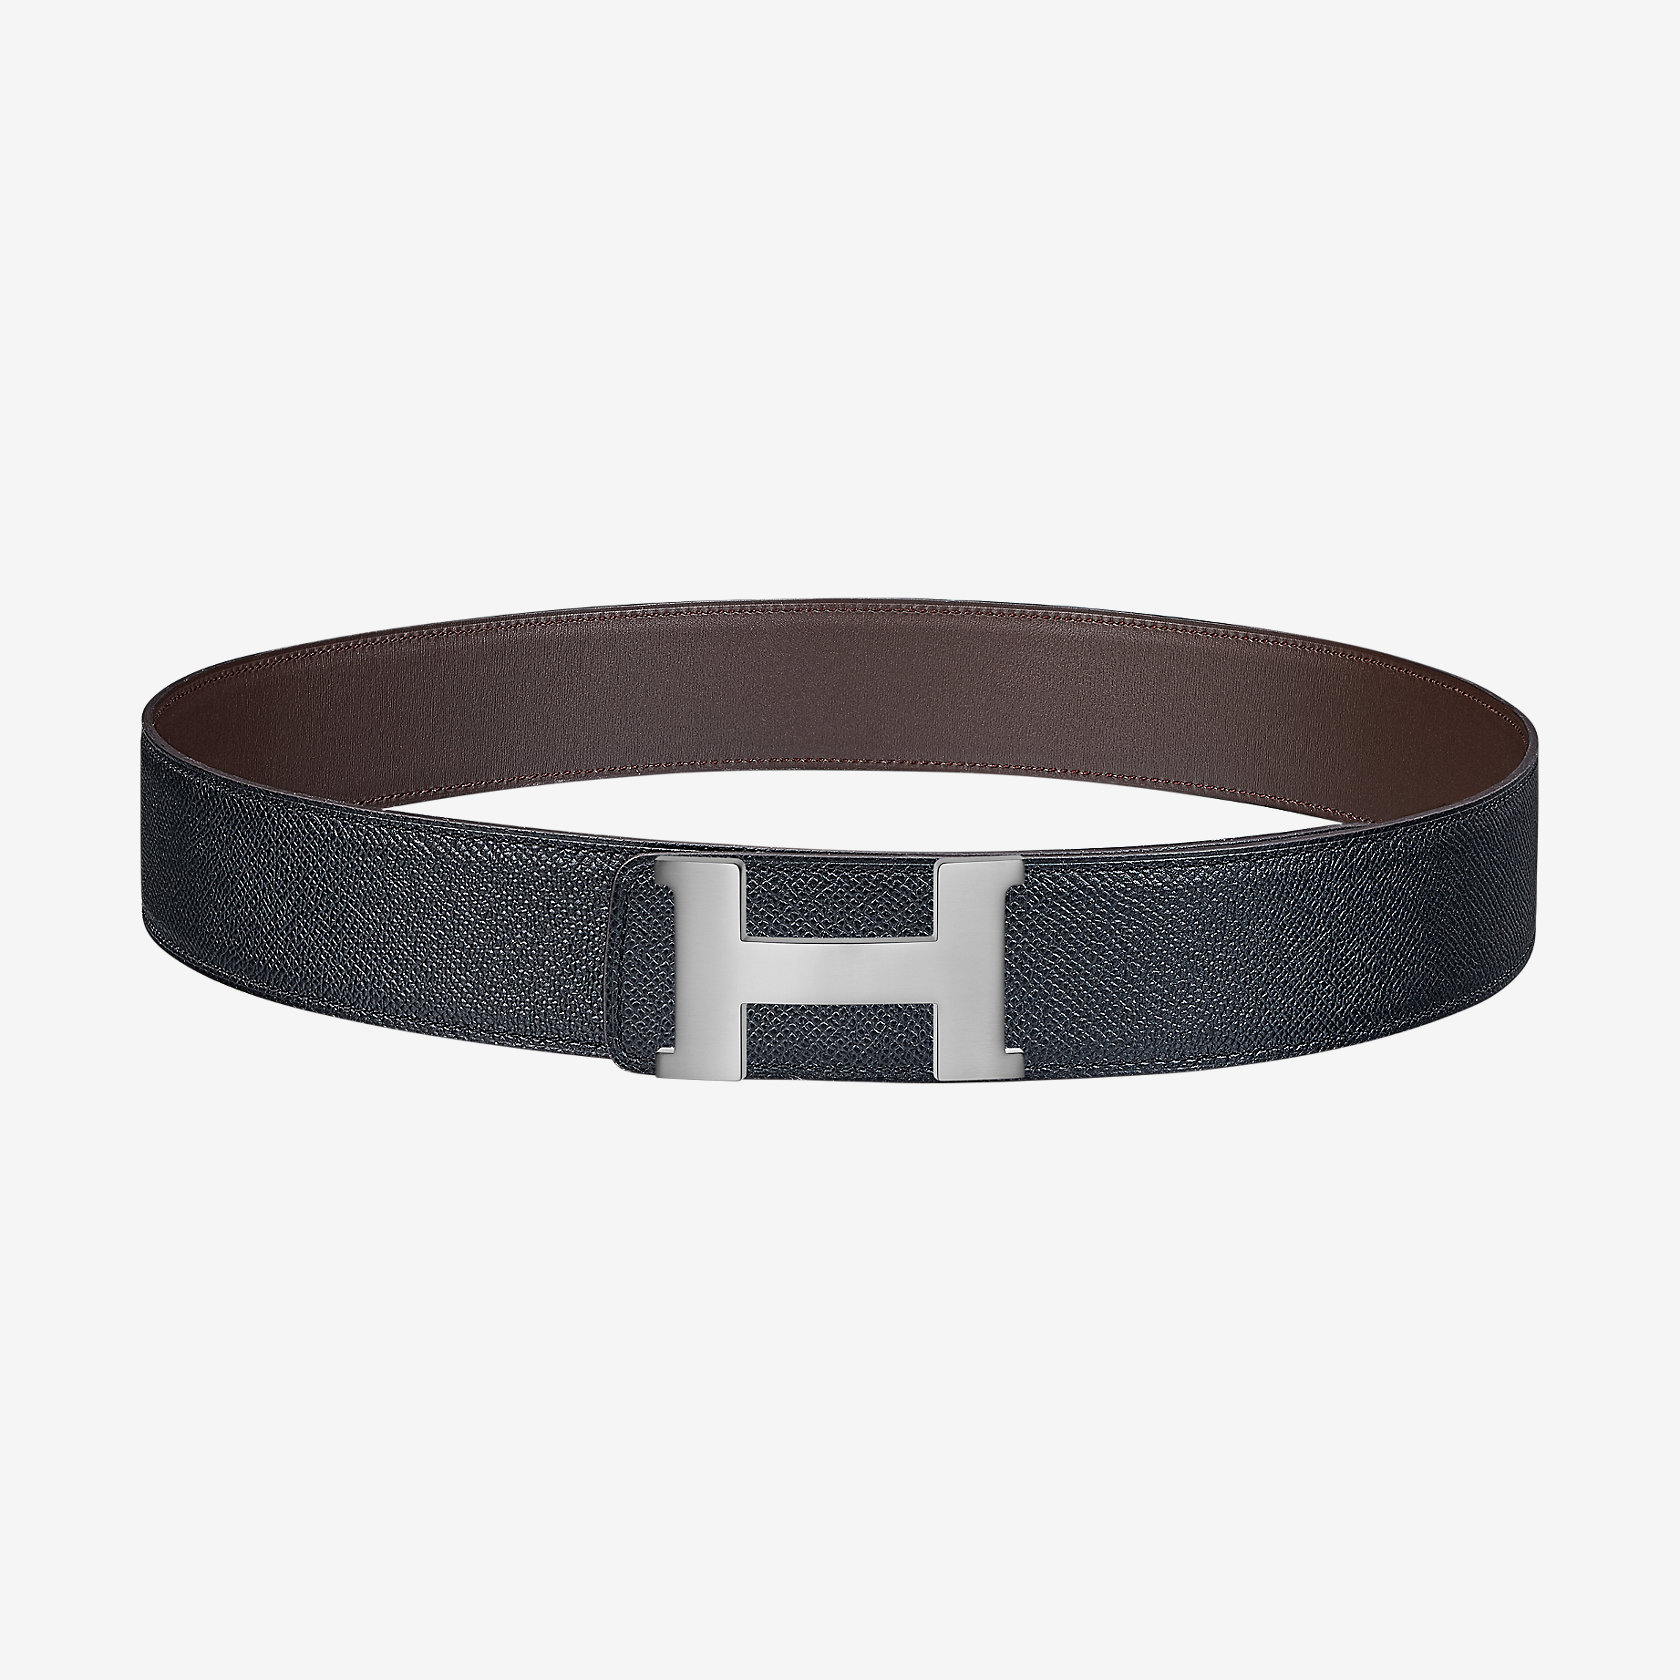 Constance 2 belt buckle & Leather strap 42 mm | Hermes Canada